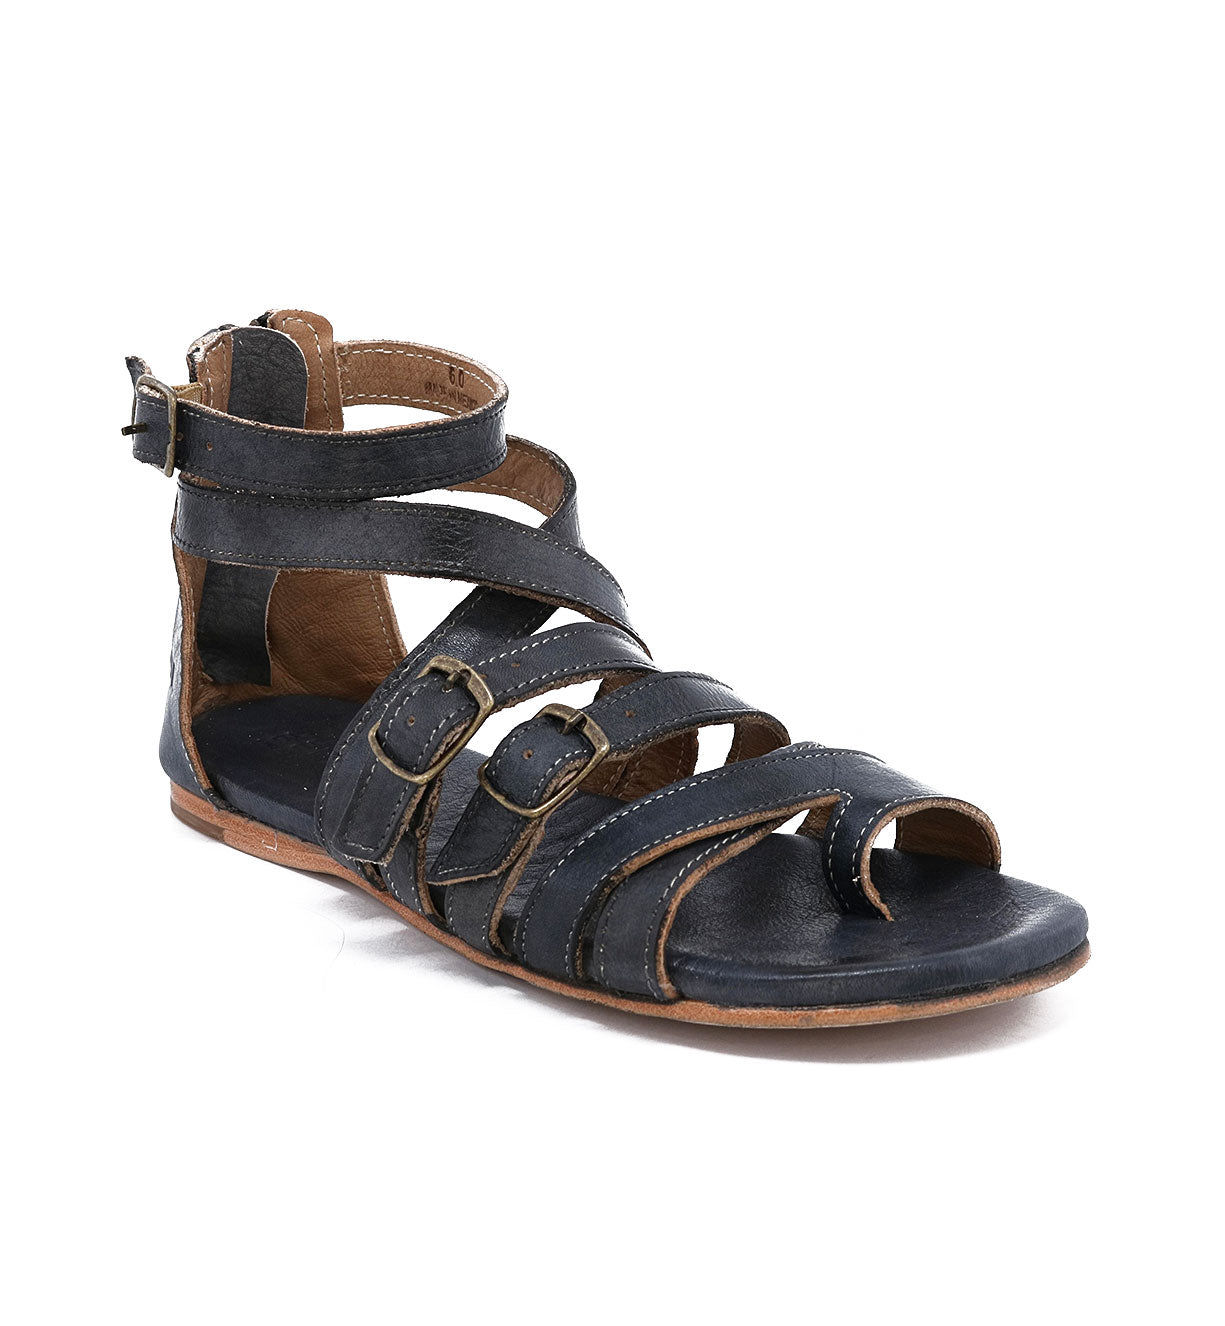 A women's Miya black pure leather sandal by Bed Stu with straps and buckles.